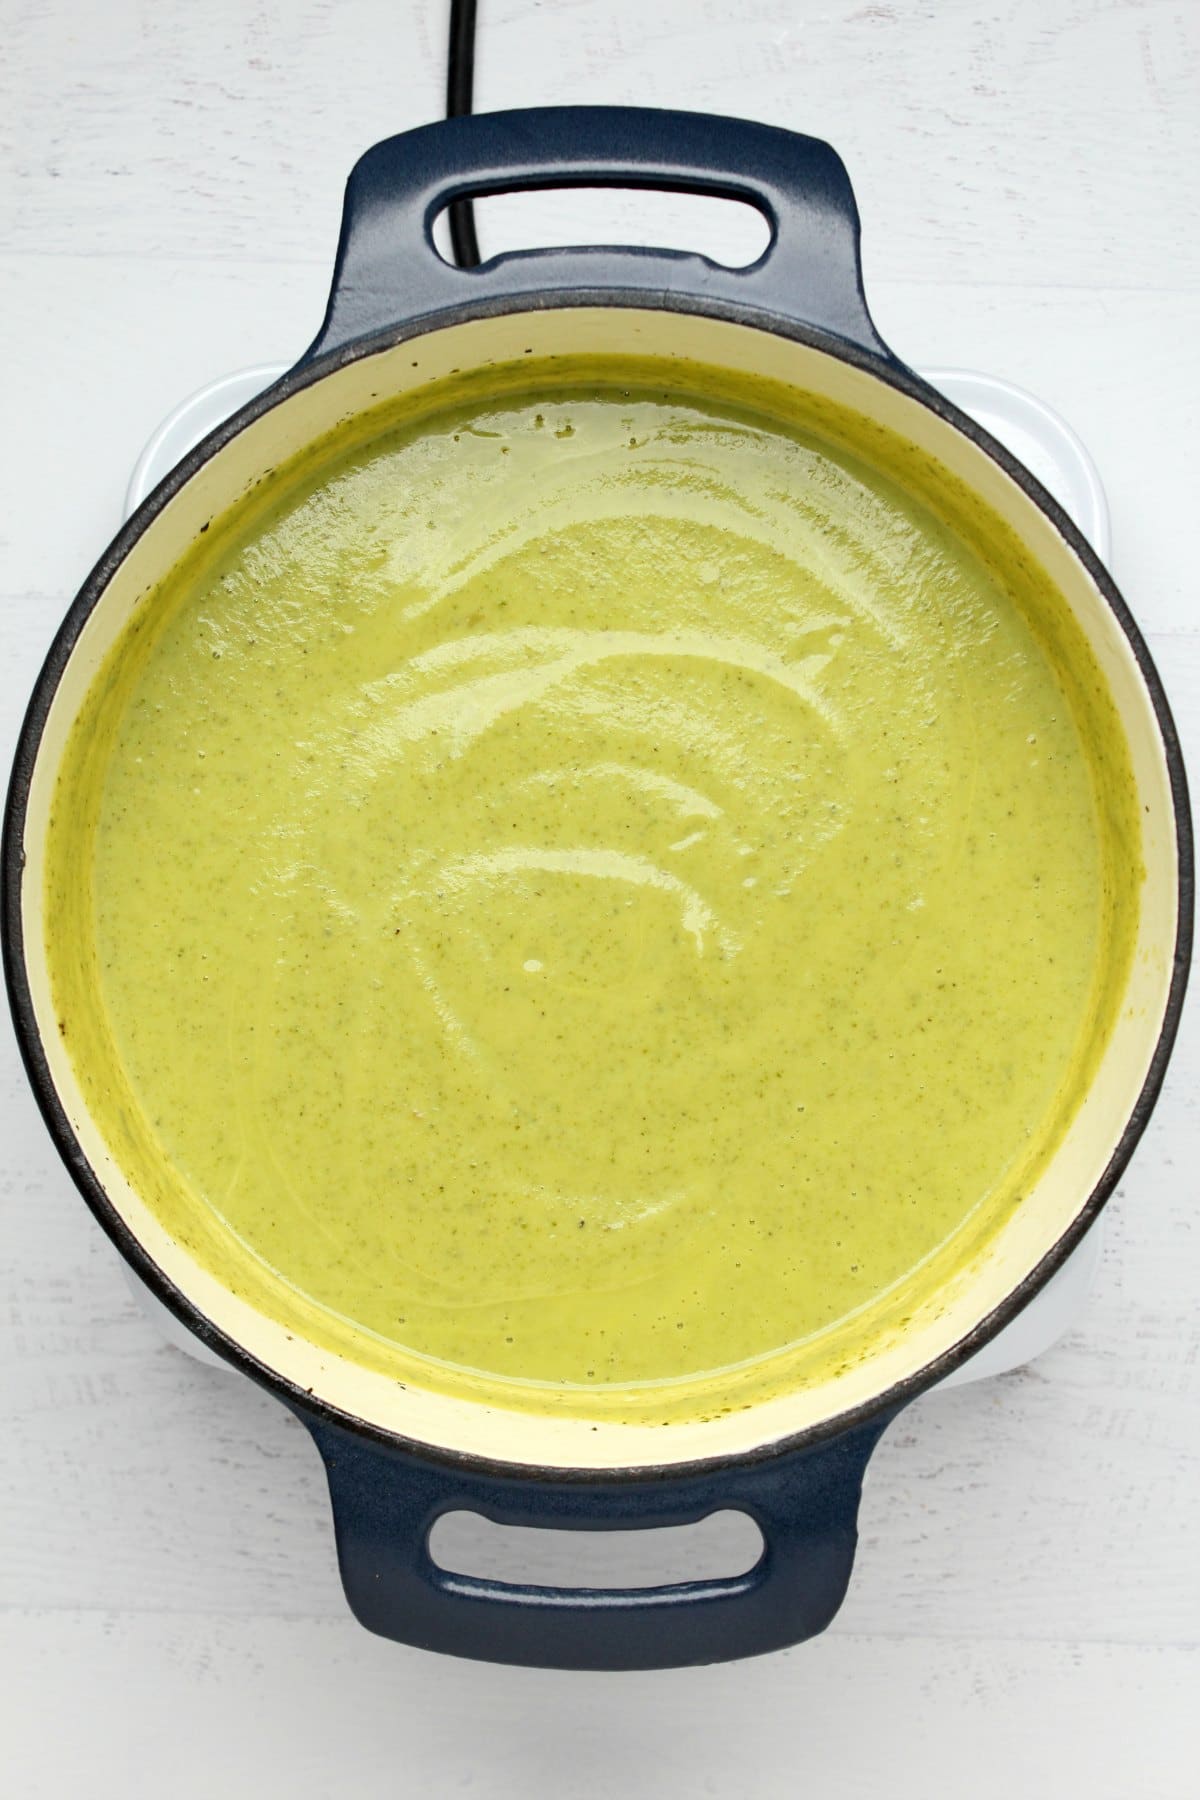 Blended zucchini soup in a pot.